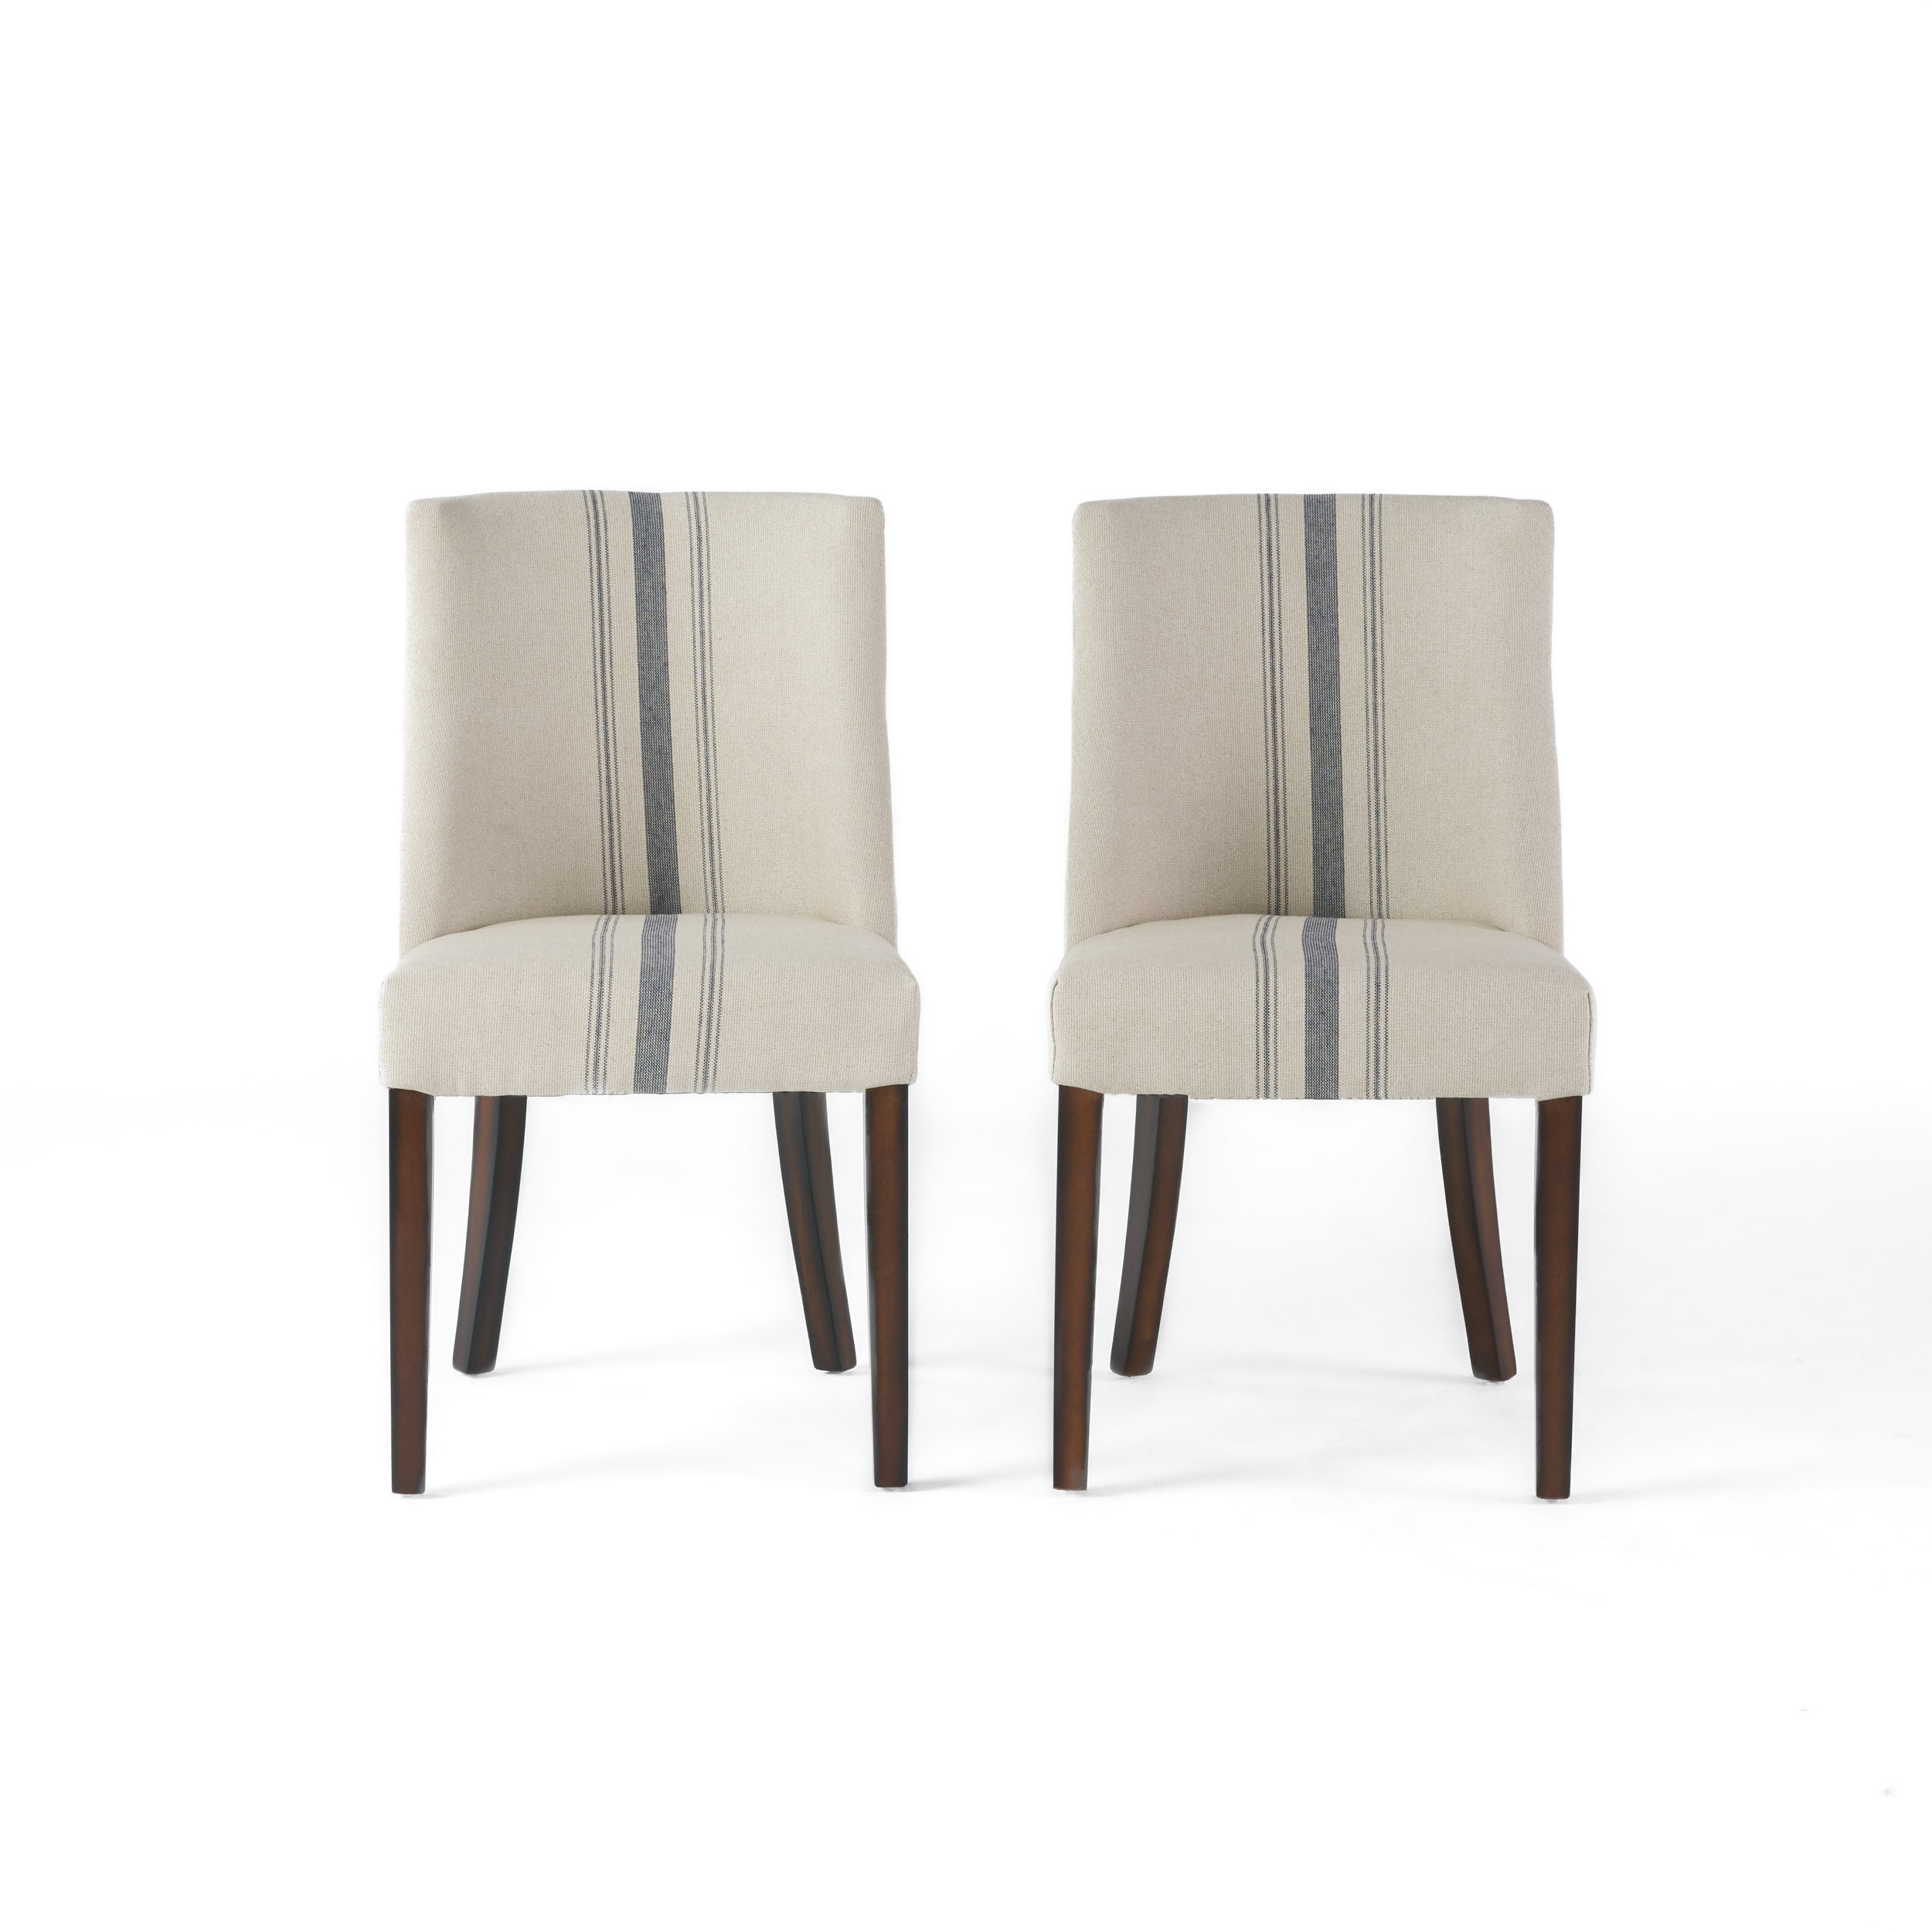 Rydel Blue Stripe Fabric Dining Chairs (Set Of 2)